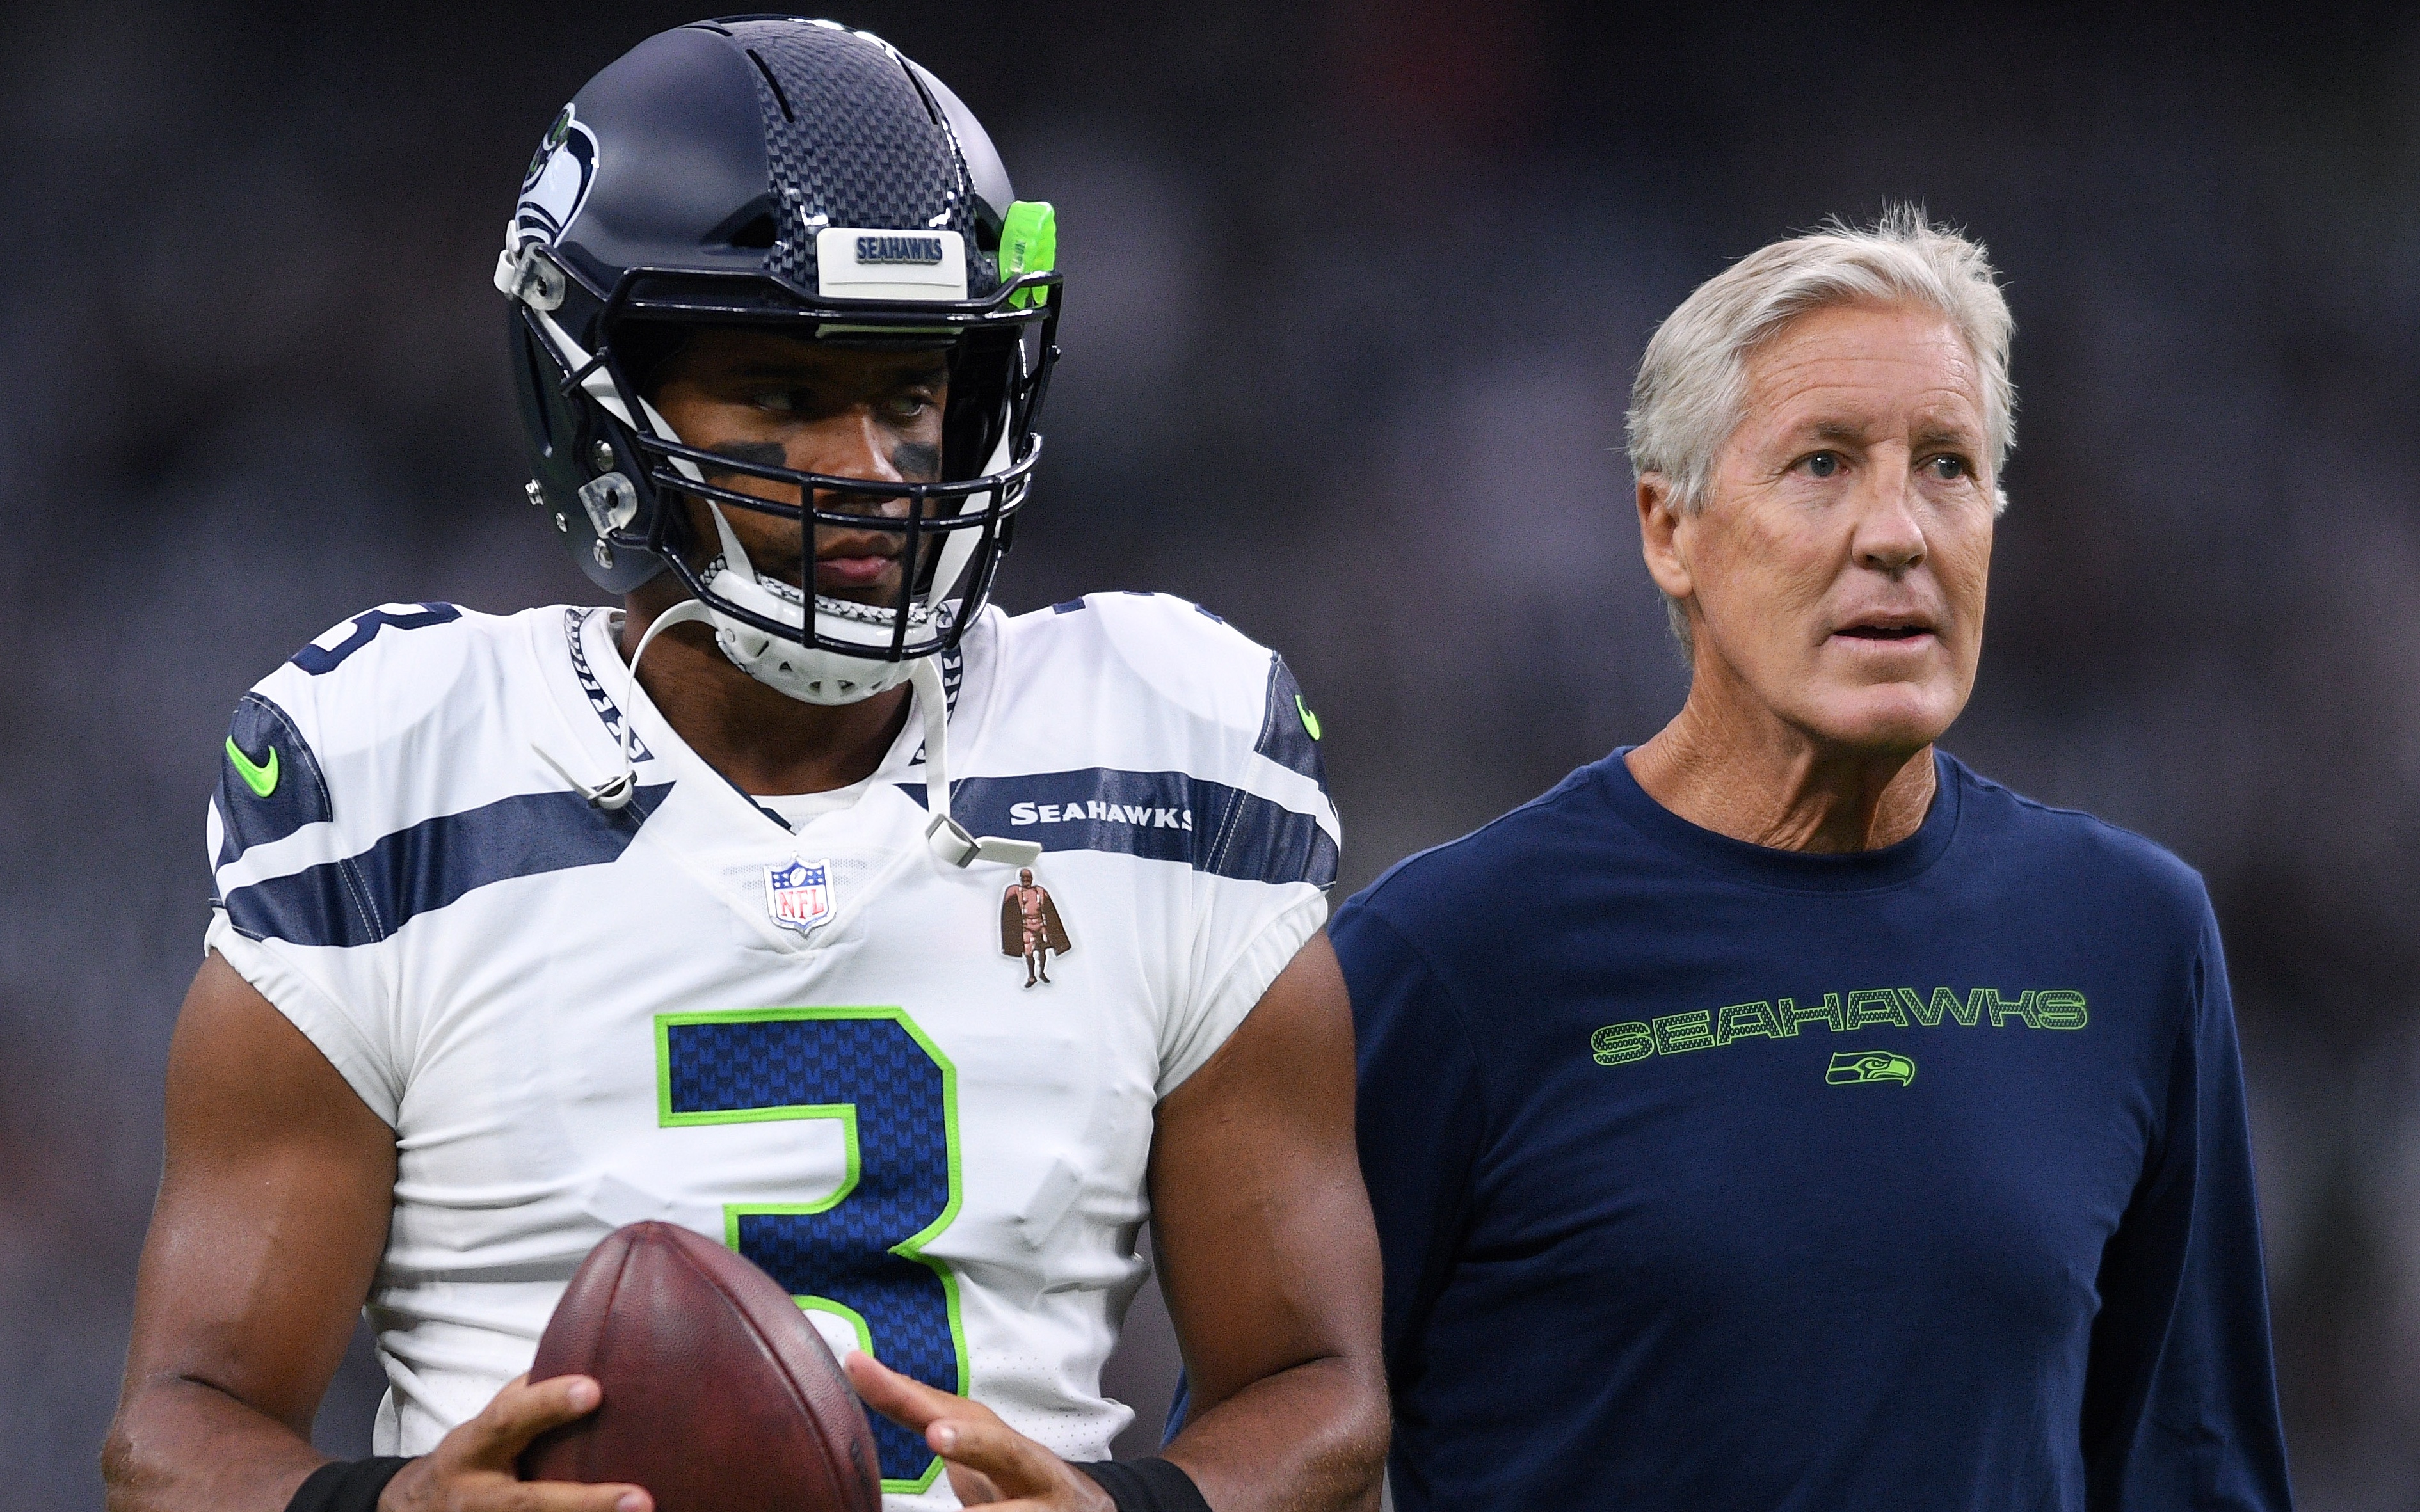 Pete Carroll and Russell Wilson in 2021. Credit: Orlando Ramirez, USA TODAY Sports.